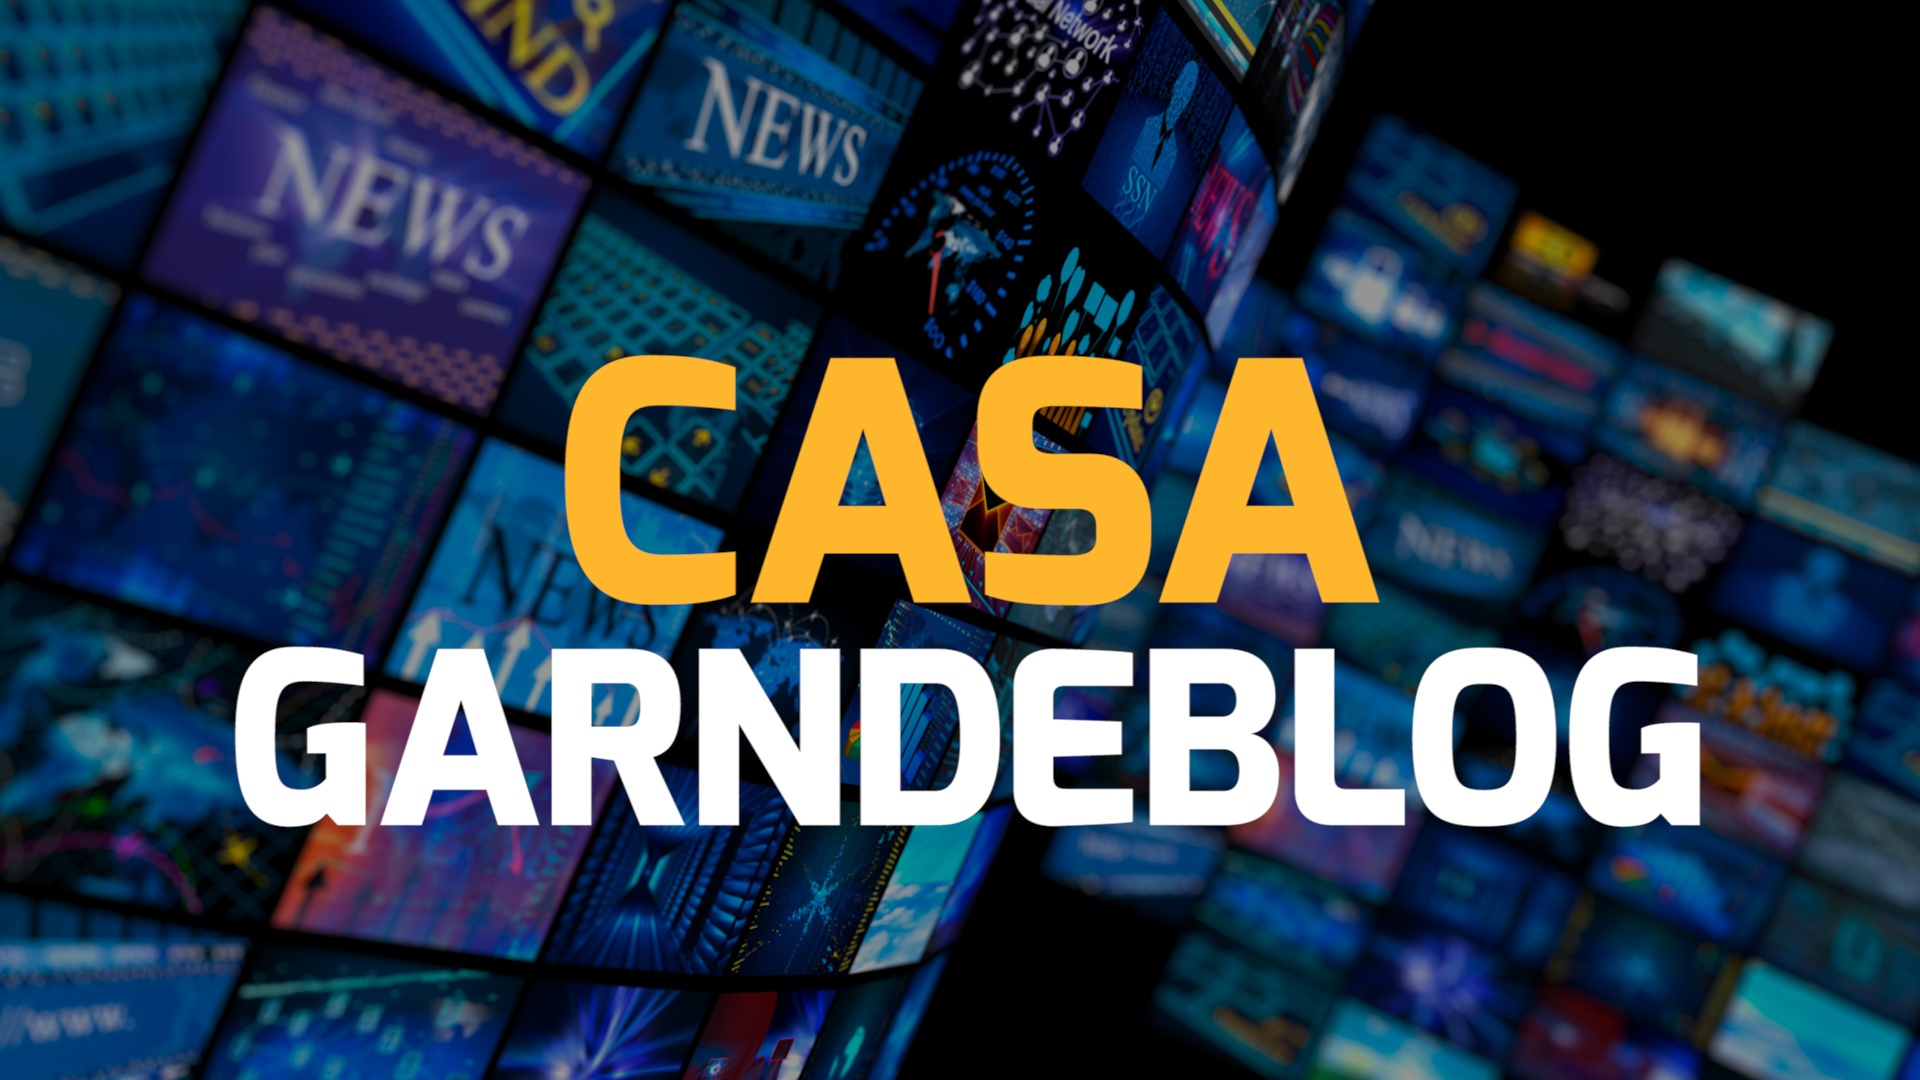 Casa Grande Blog is an all in one creative site providing unique content to its readers.